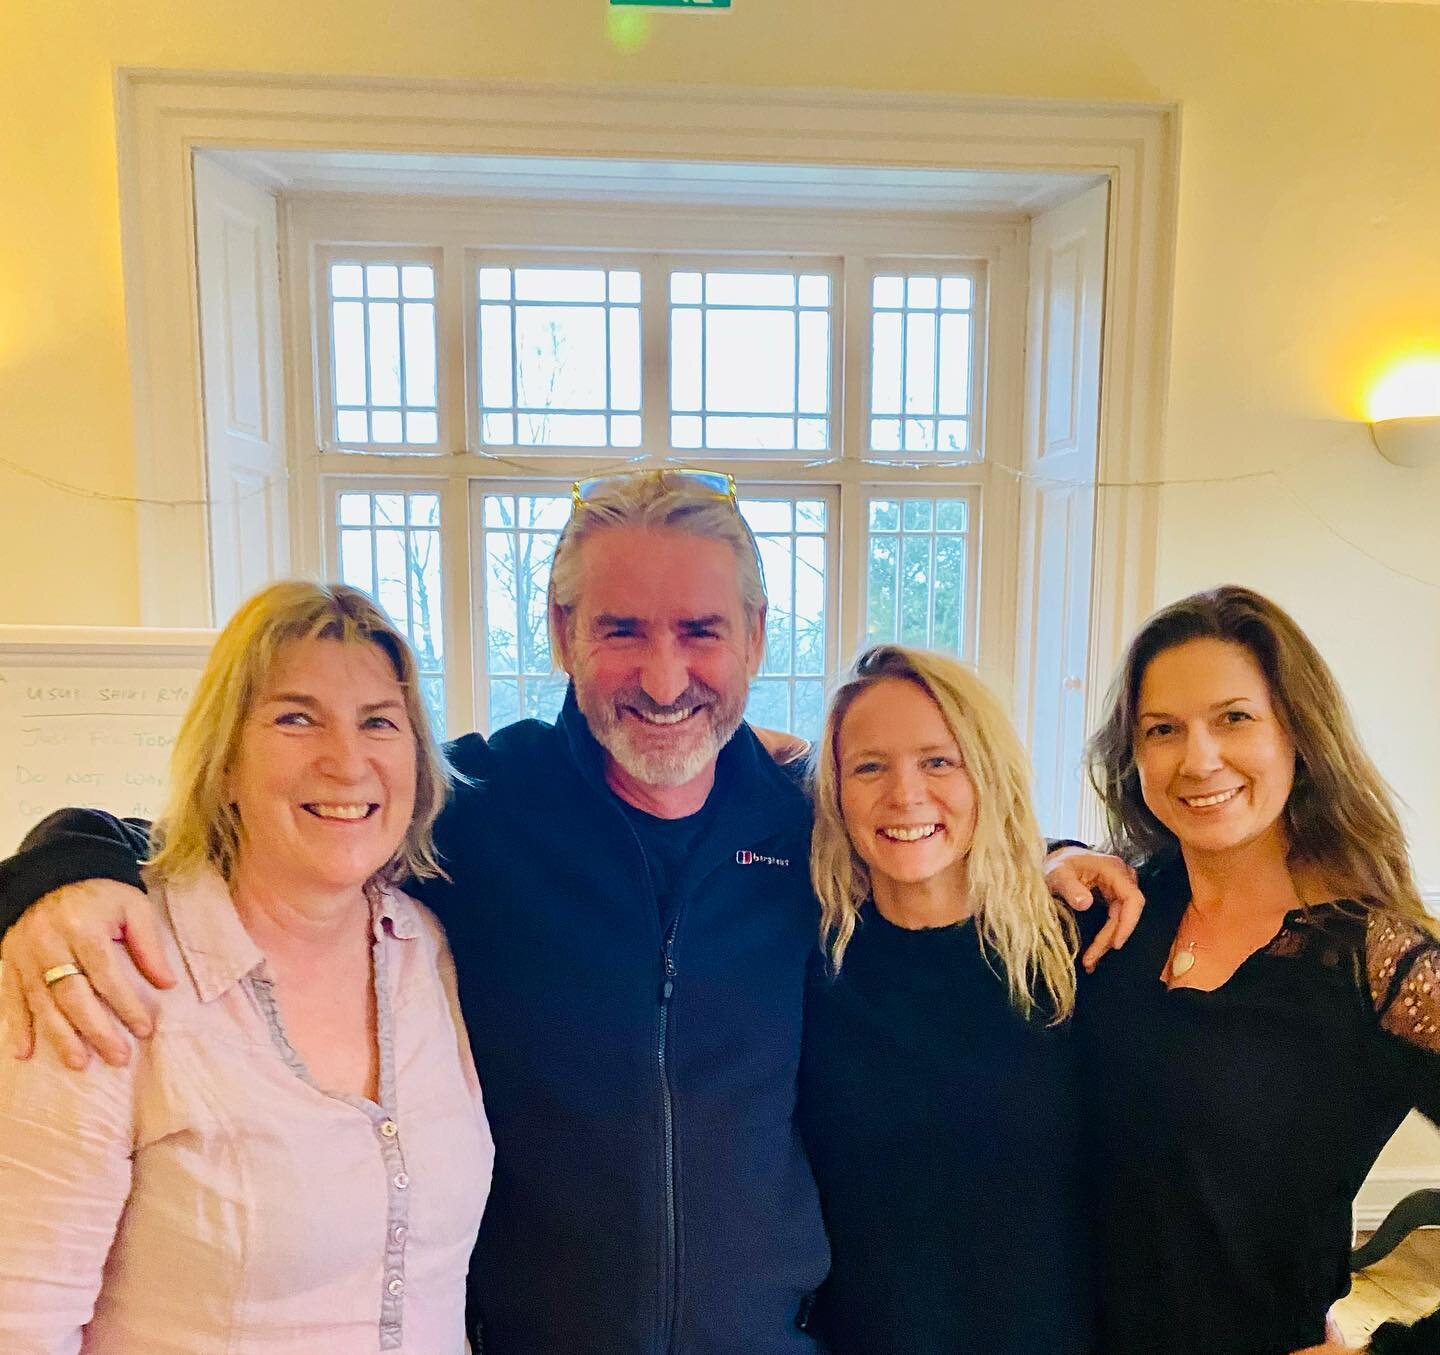 Still buzzing after an amazing weekend assisting my brilliant Reiki teacher @richardellisreiki with the lovely @rebeccammarr &amp; Kate White on a Reiki 1 course - such a lovely group of students. #Reiki #teaching #healing #sharethereikilove #newfore